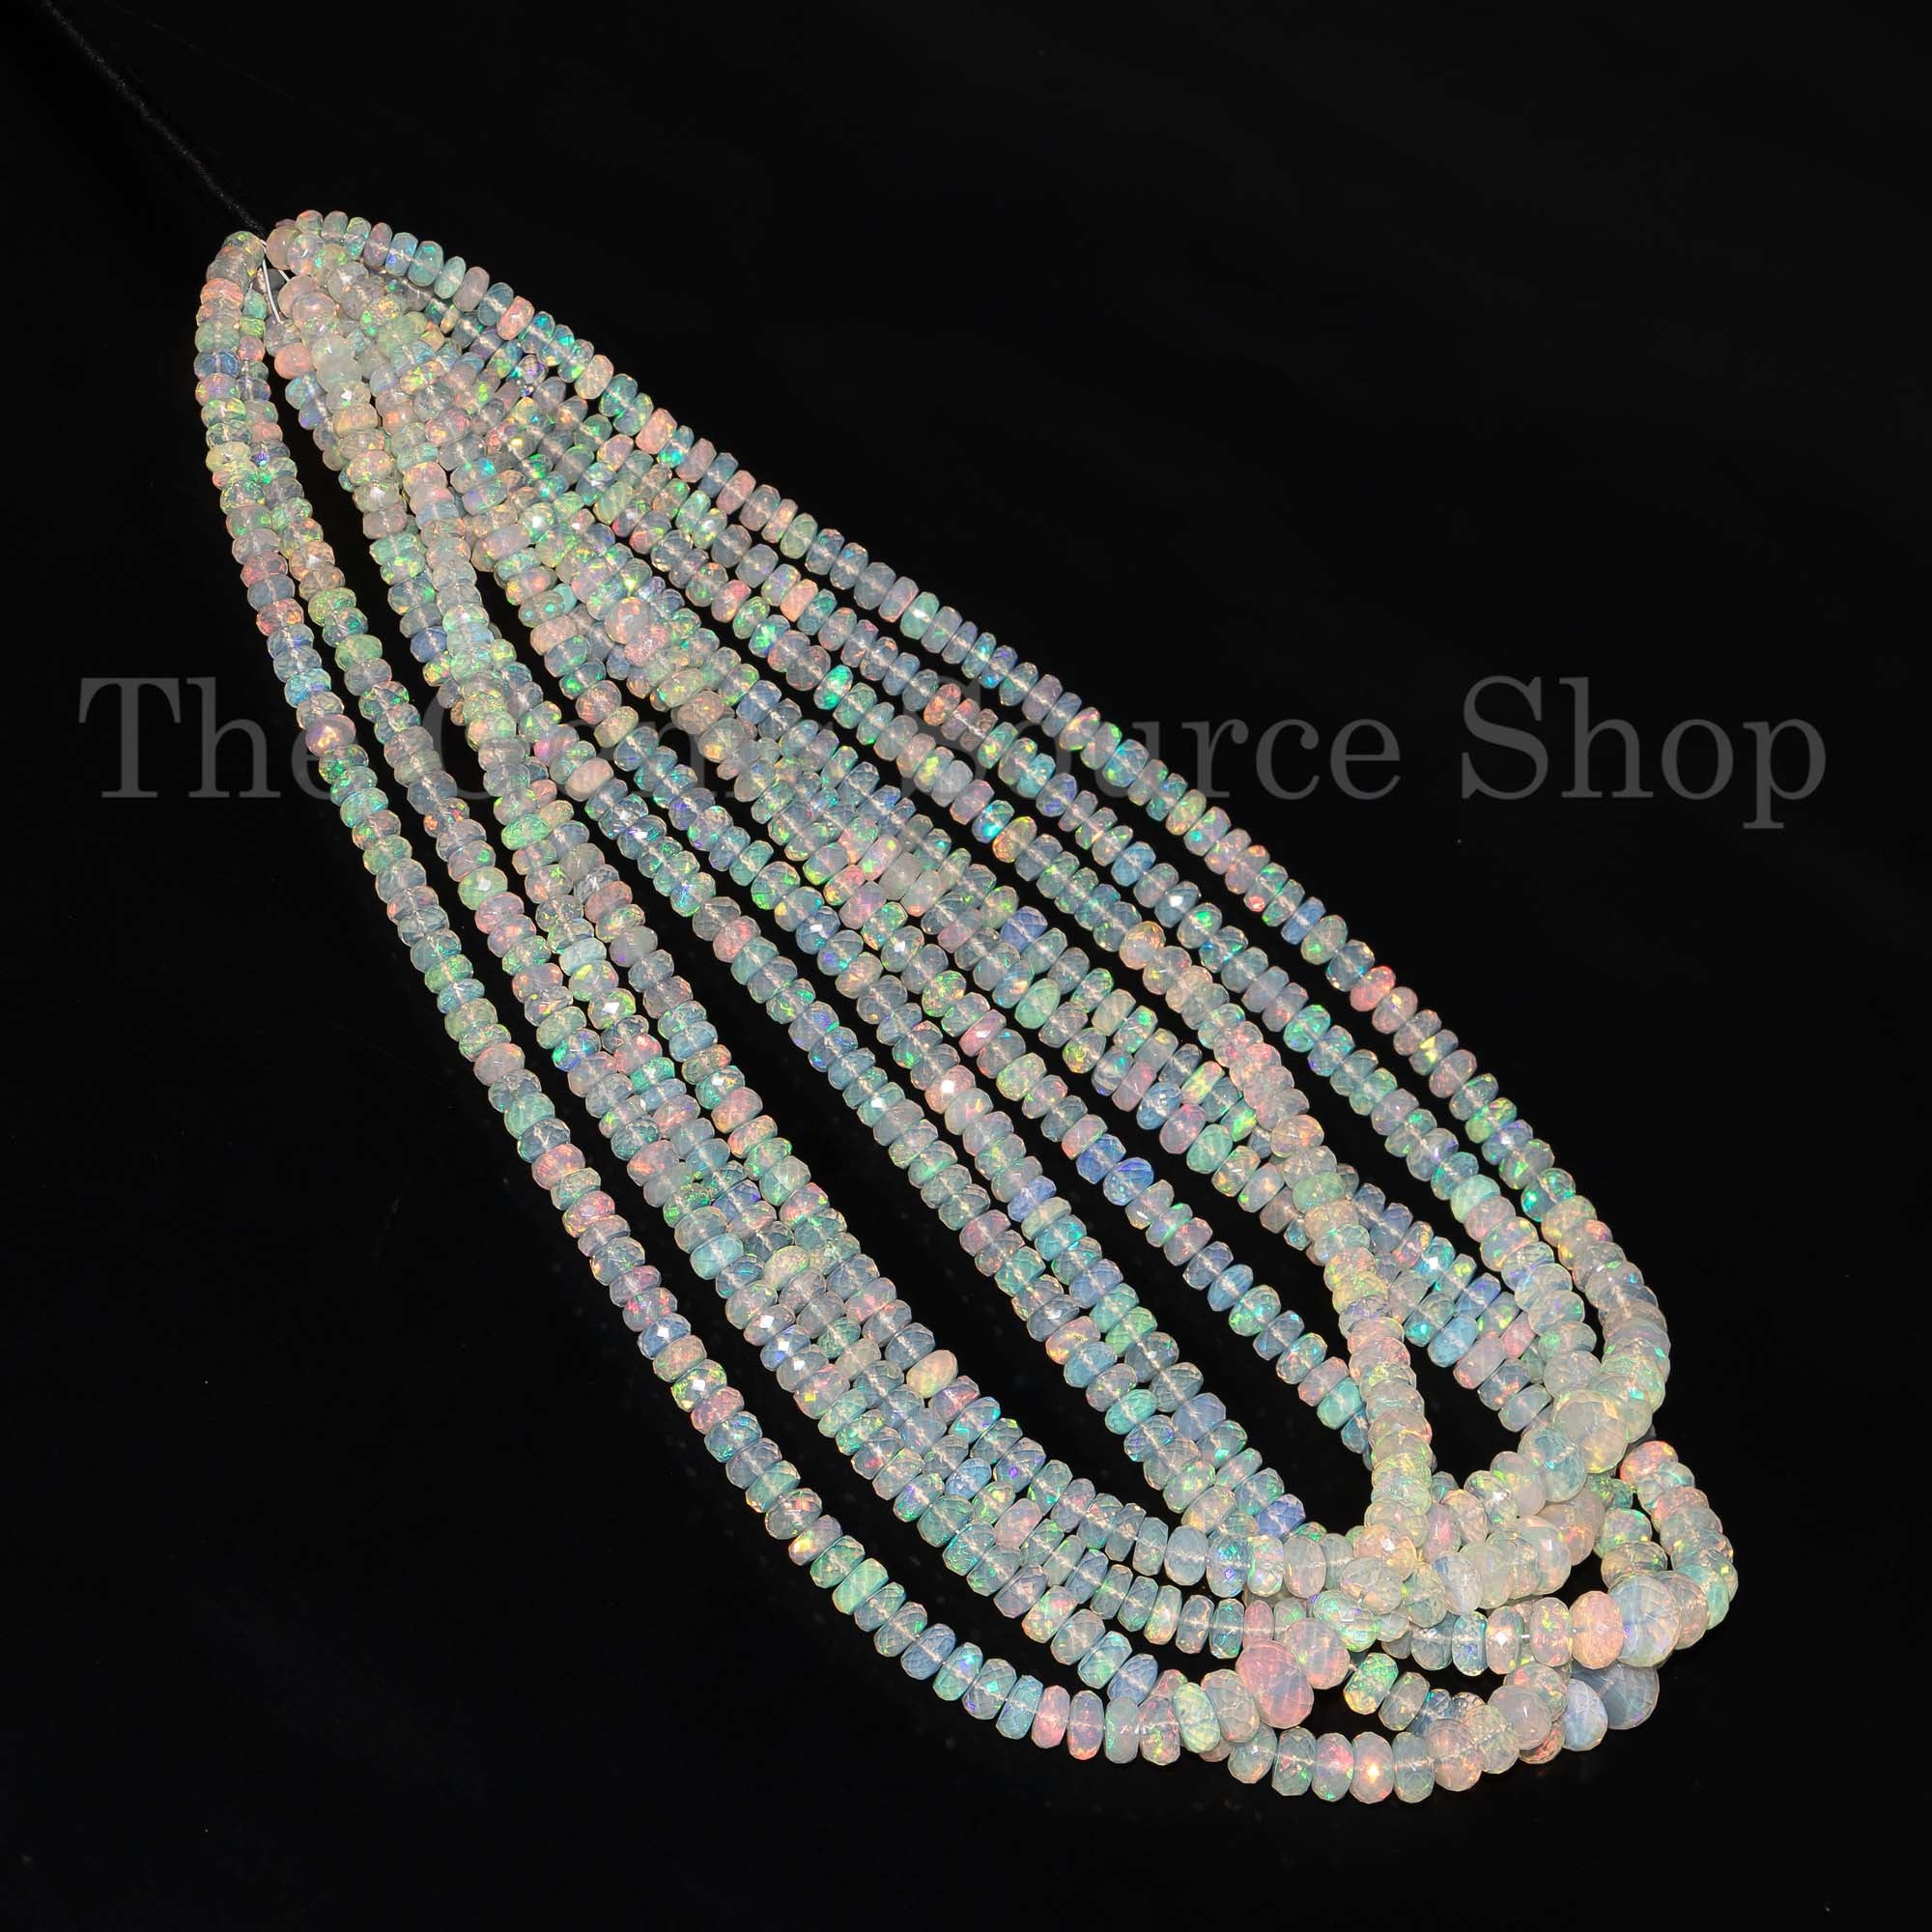 Synthetic Opalite Beads, Heishi Rondelle Beads, about 6x12mm, 33 Beads,  Length 8”